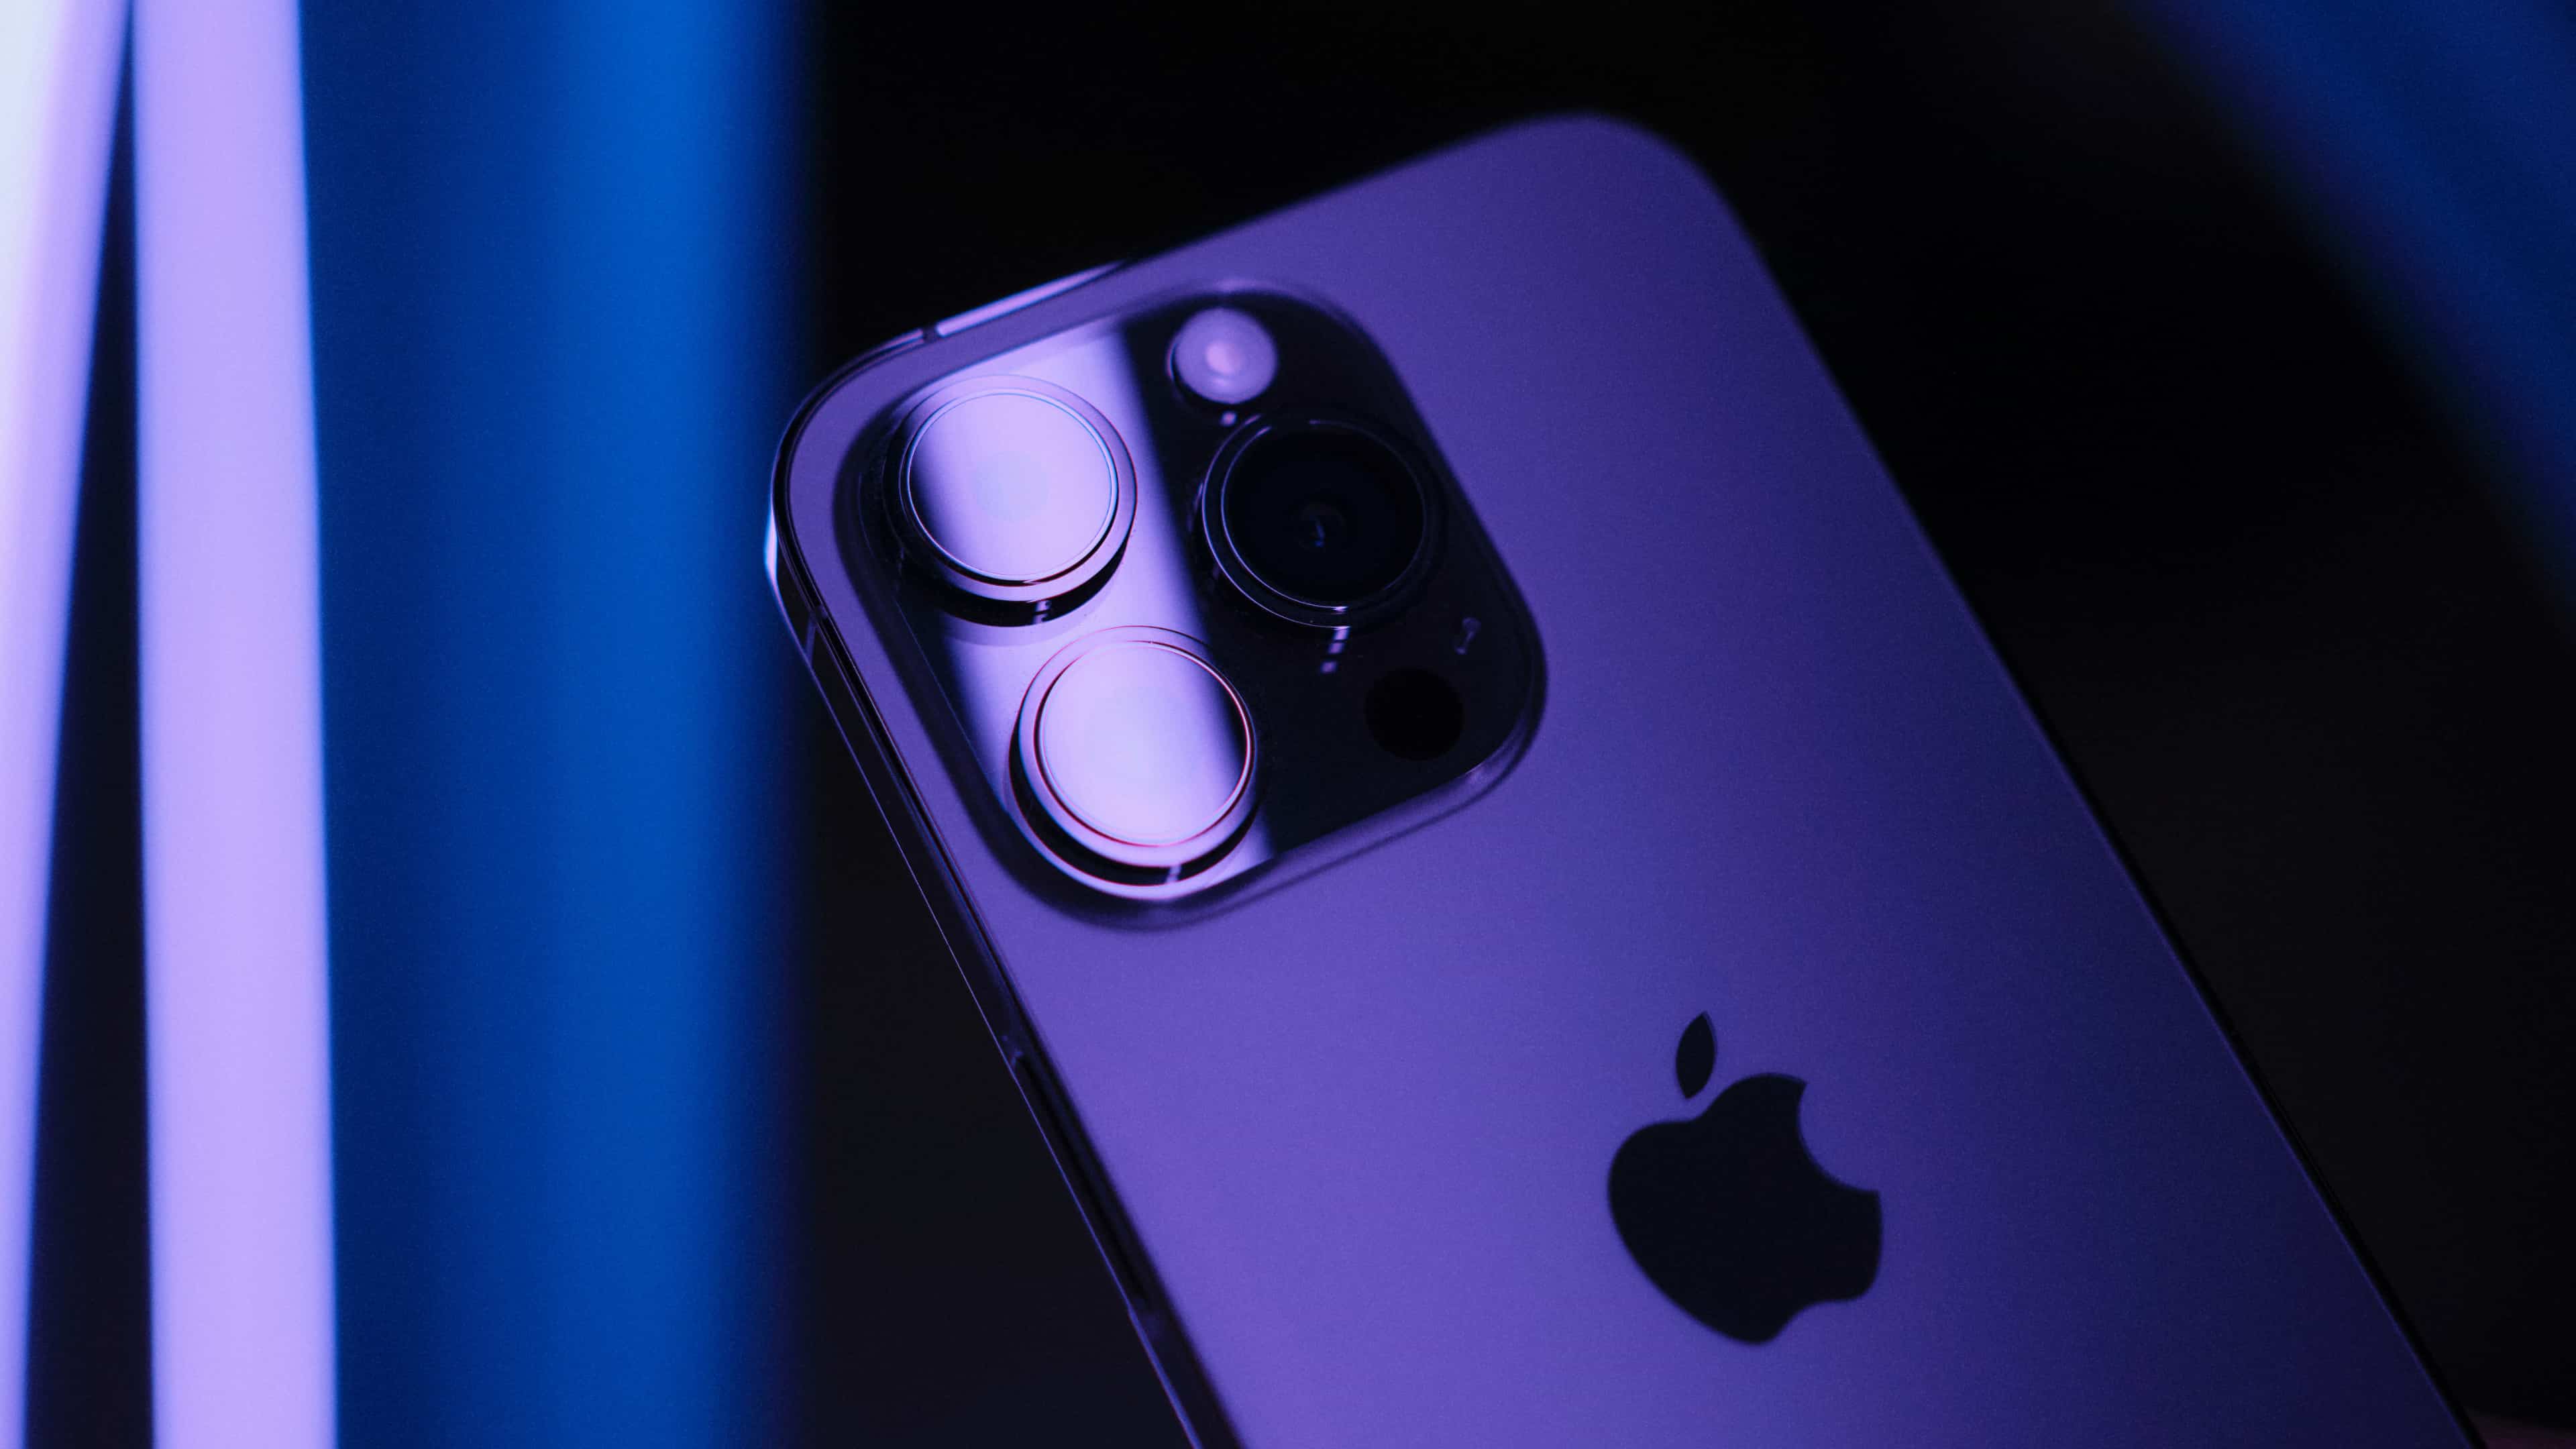 Close-up of the back cameras on deep purple iPhone 14 Pro.